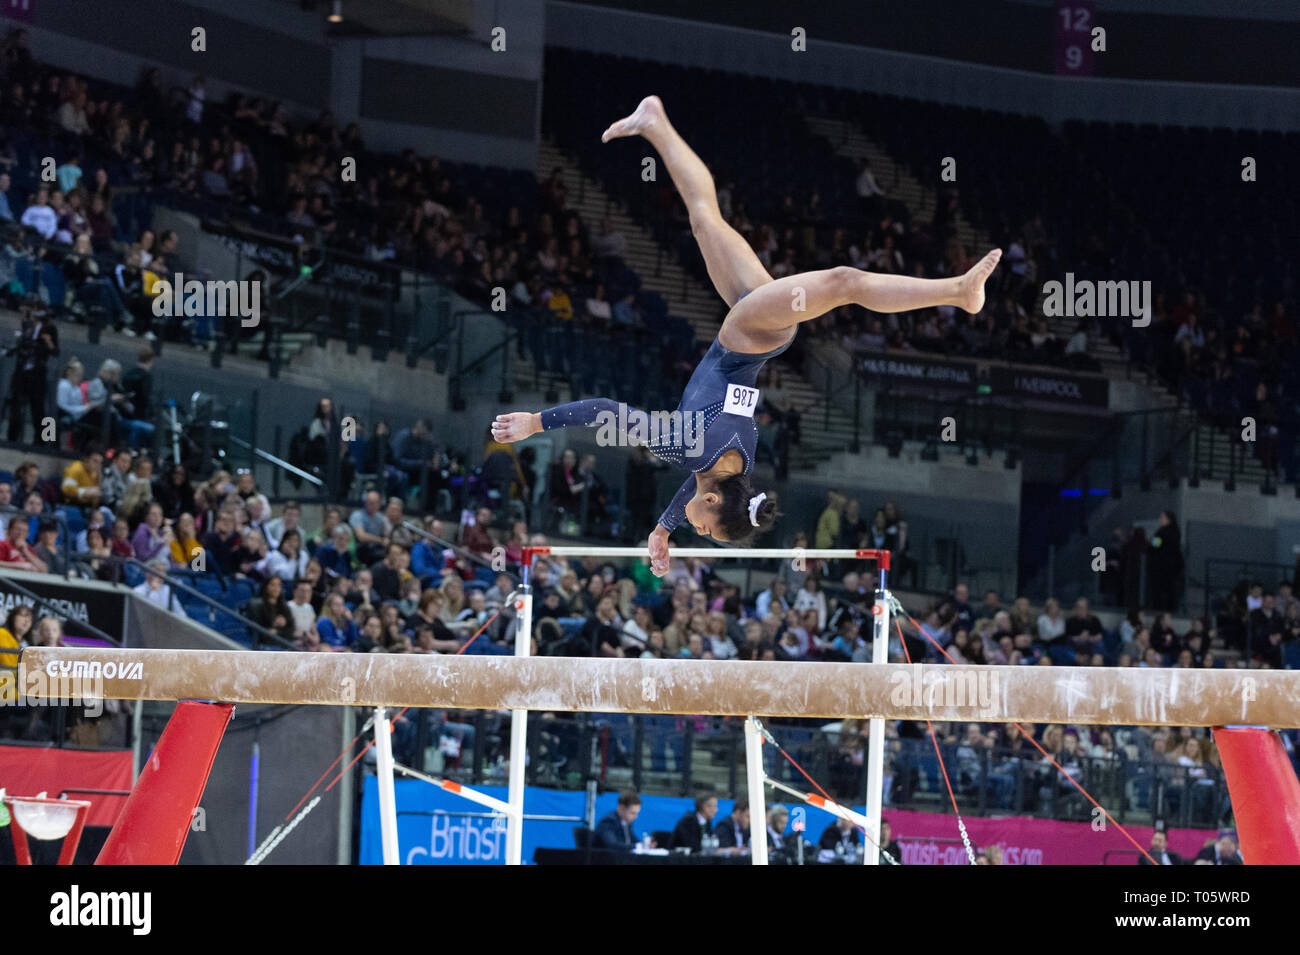 Liverpool, UK. 17th March 2019. Alia Leat of Heathrow Gym competing at the Men’s and Women’s Artistic British Championships 2019, M&S Bank Arena, Liverpool, UK. Credit: Iain Scott Photography/Alamy Live News Stock Photo